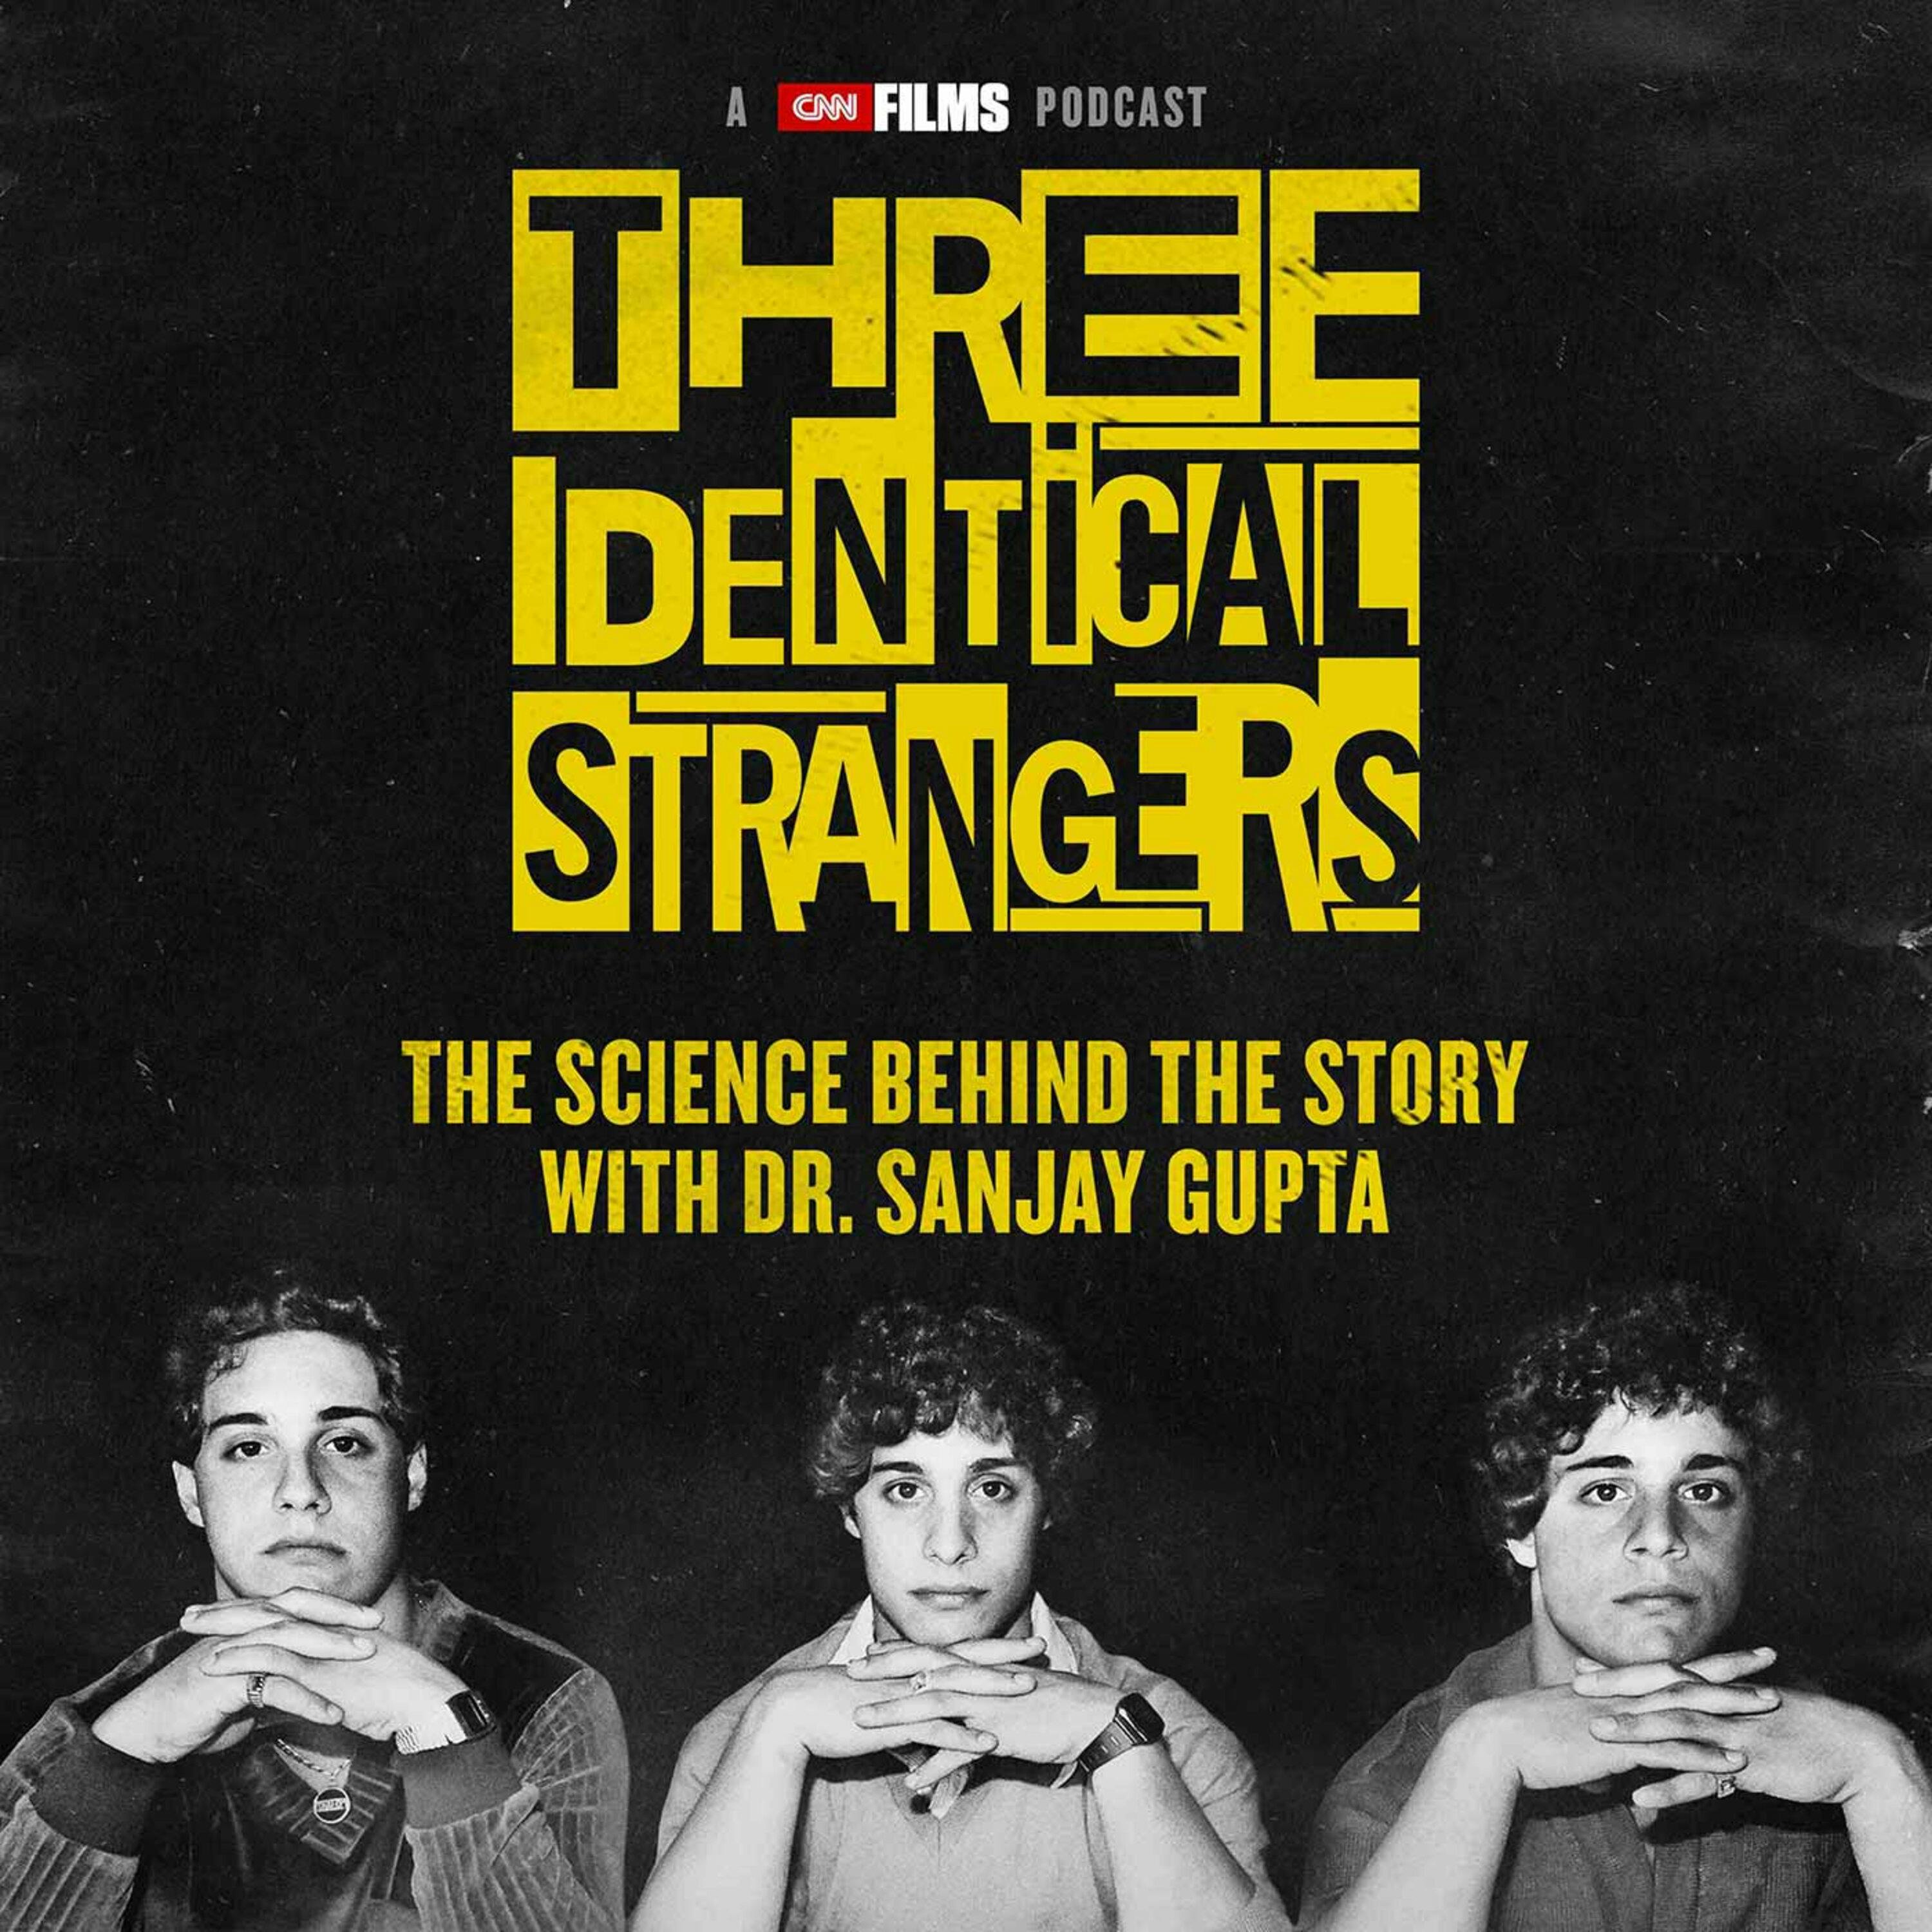 Three Identical Strangers: The Science Behind The Story